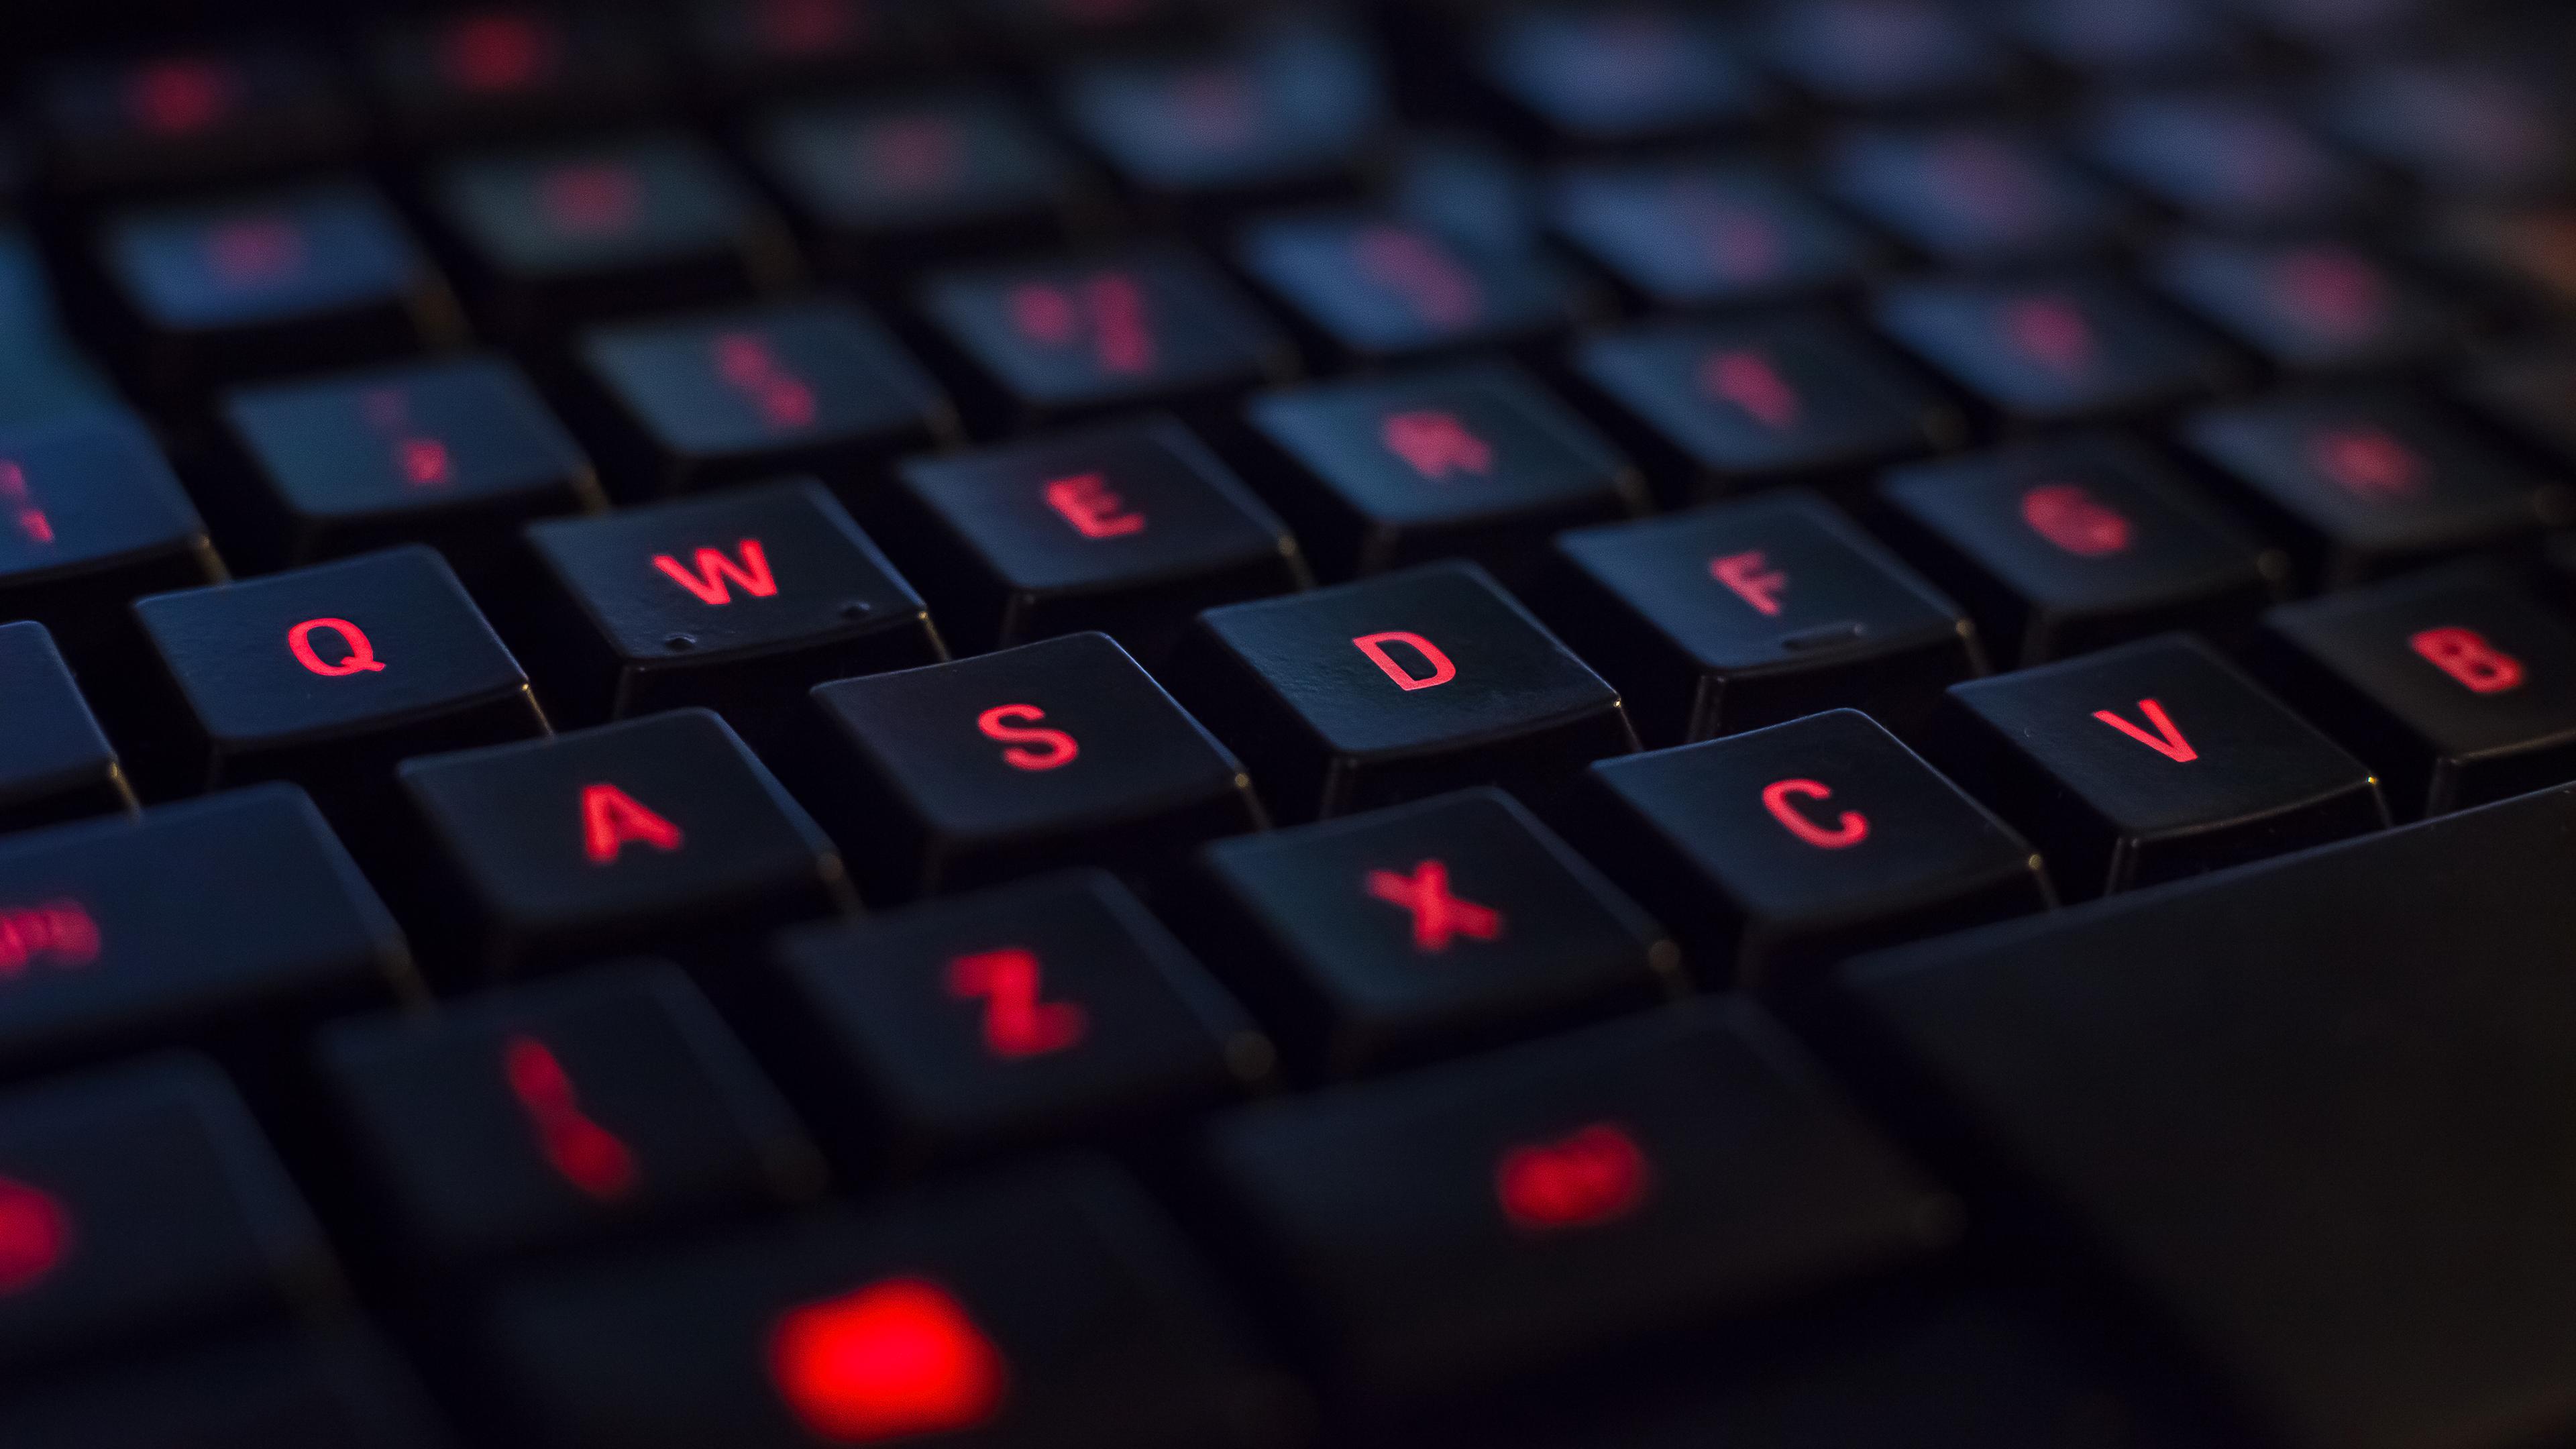 Download the Red Light Keyboard Wallpaper, Red Light Keyboard iPhone